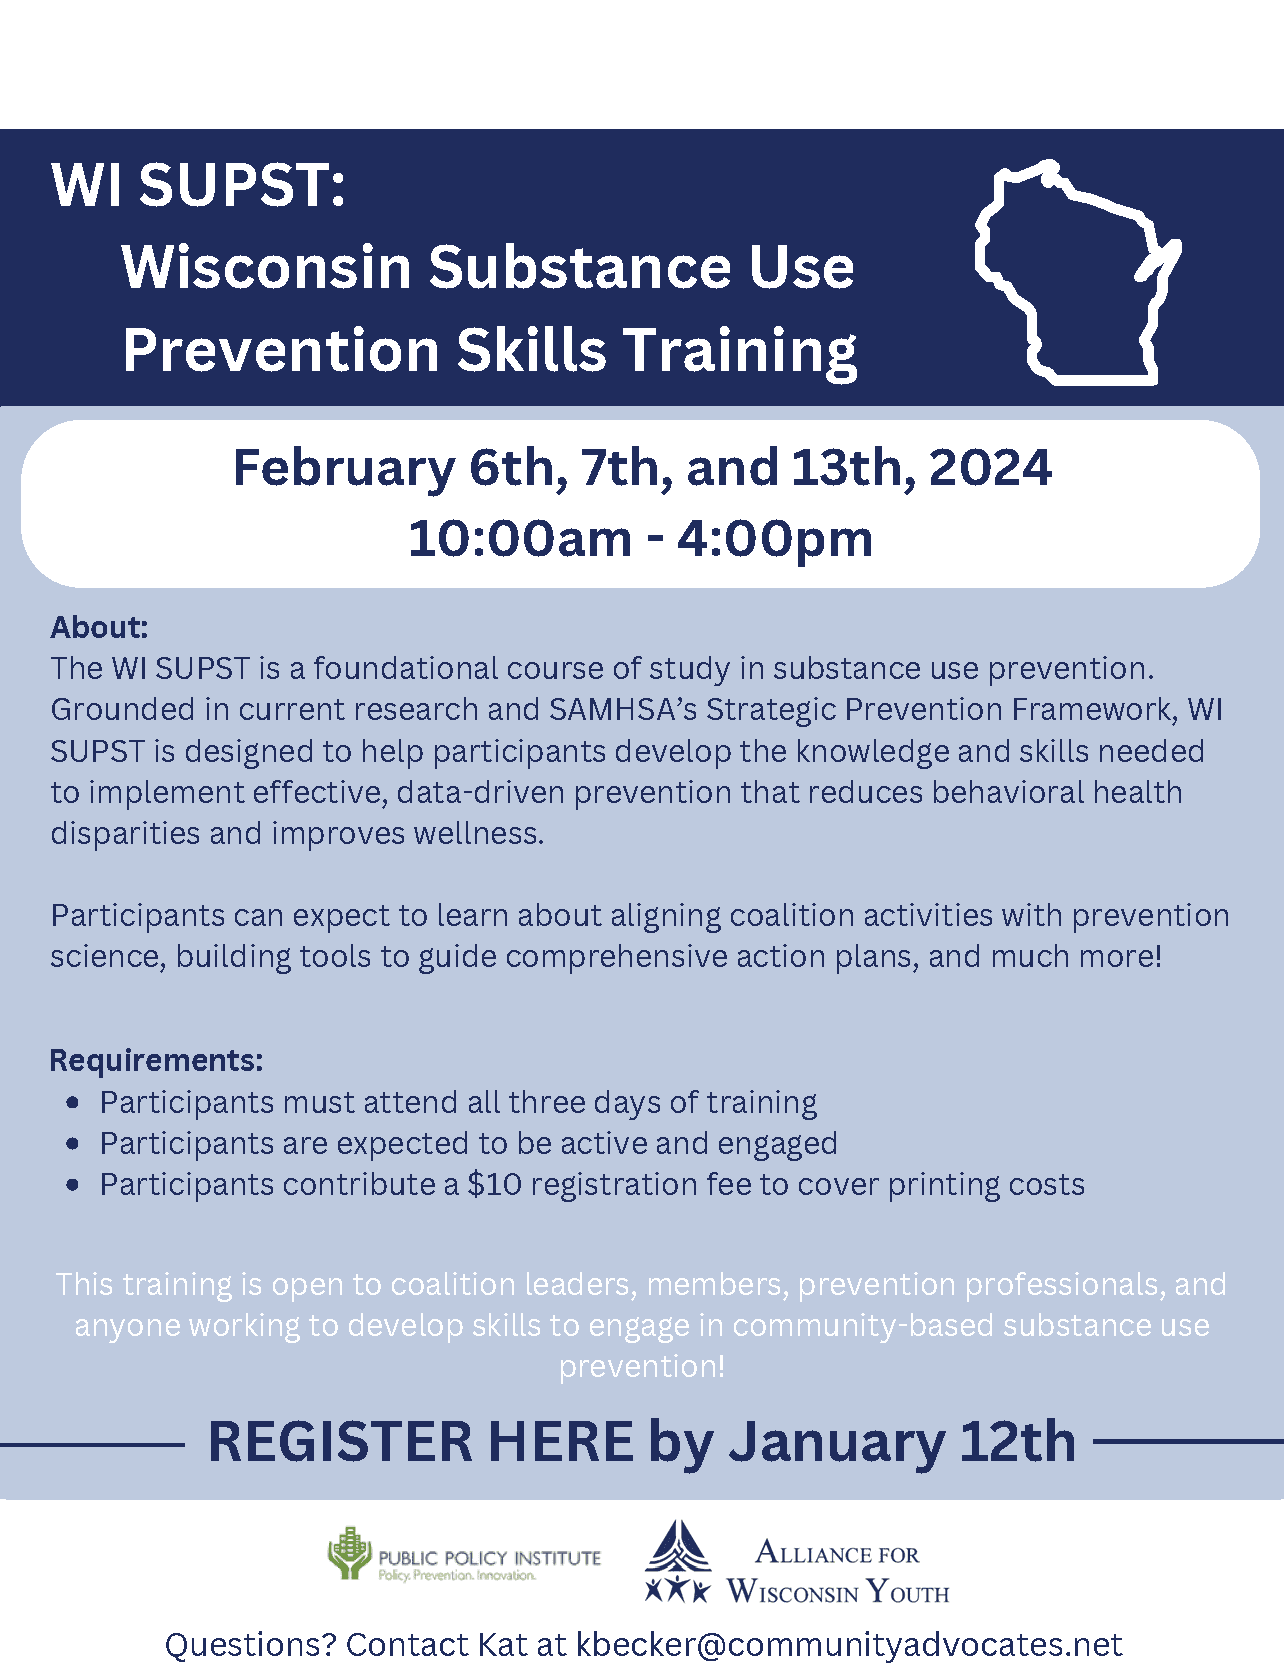 WI Substance use prevention skills training